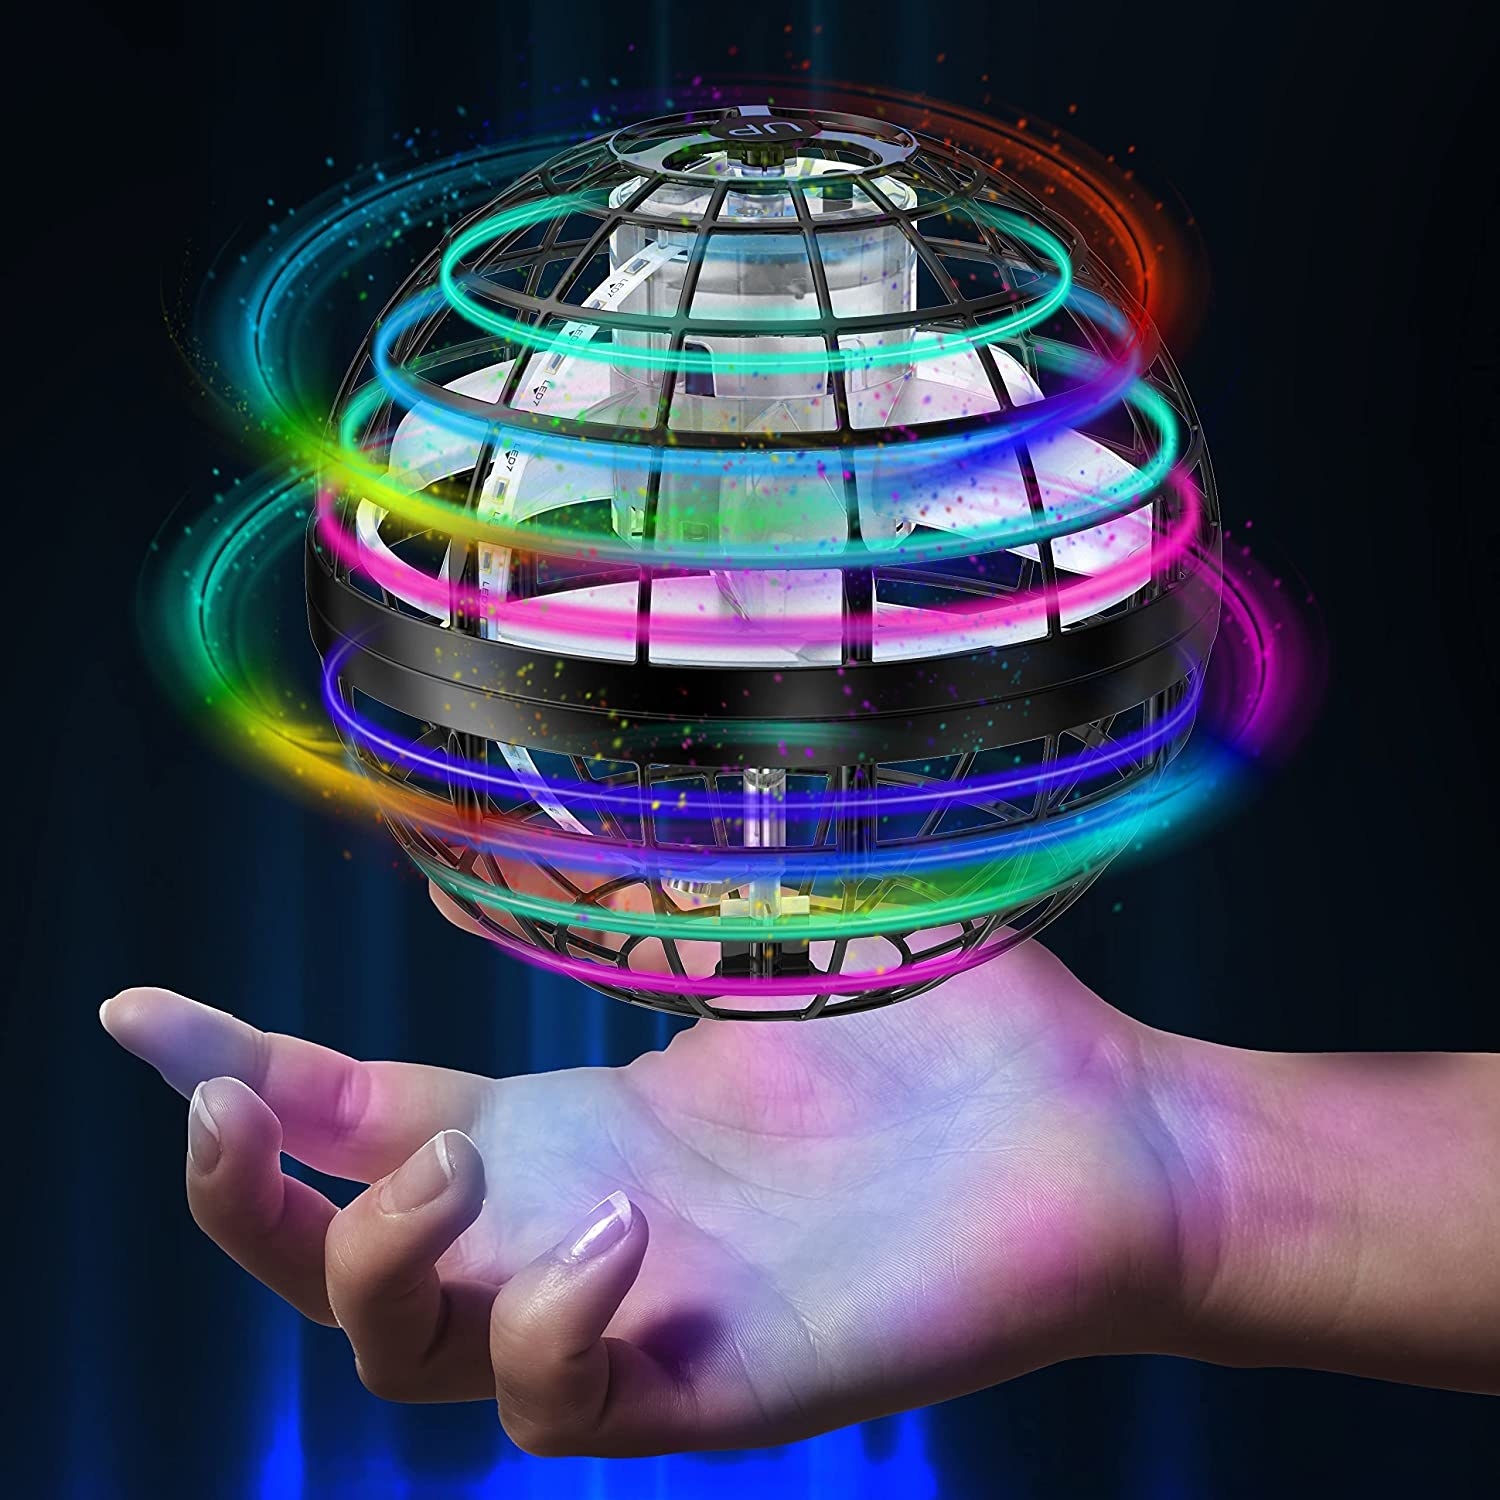 Glowing ball toy hovering above hand